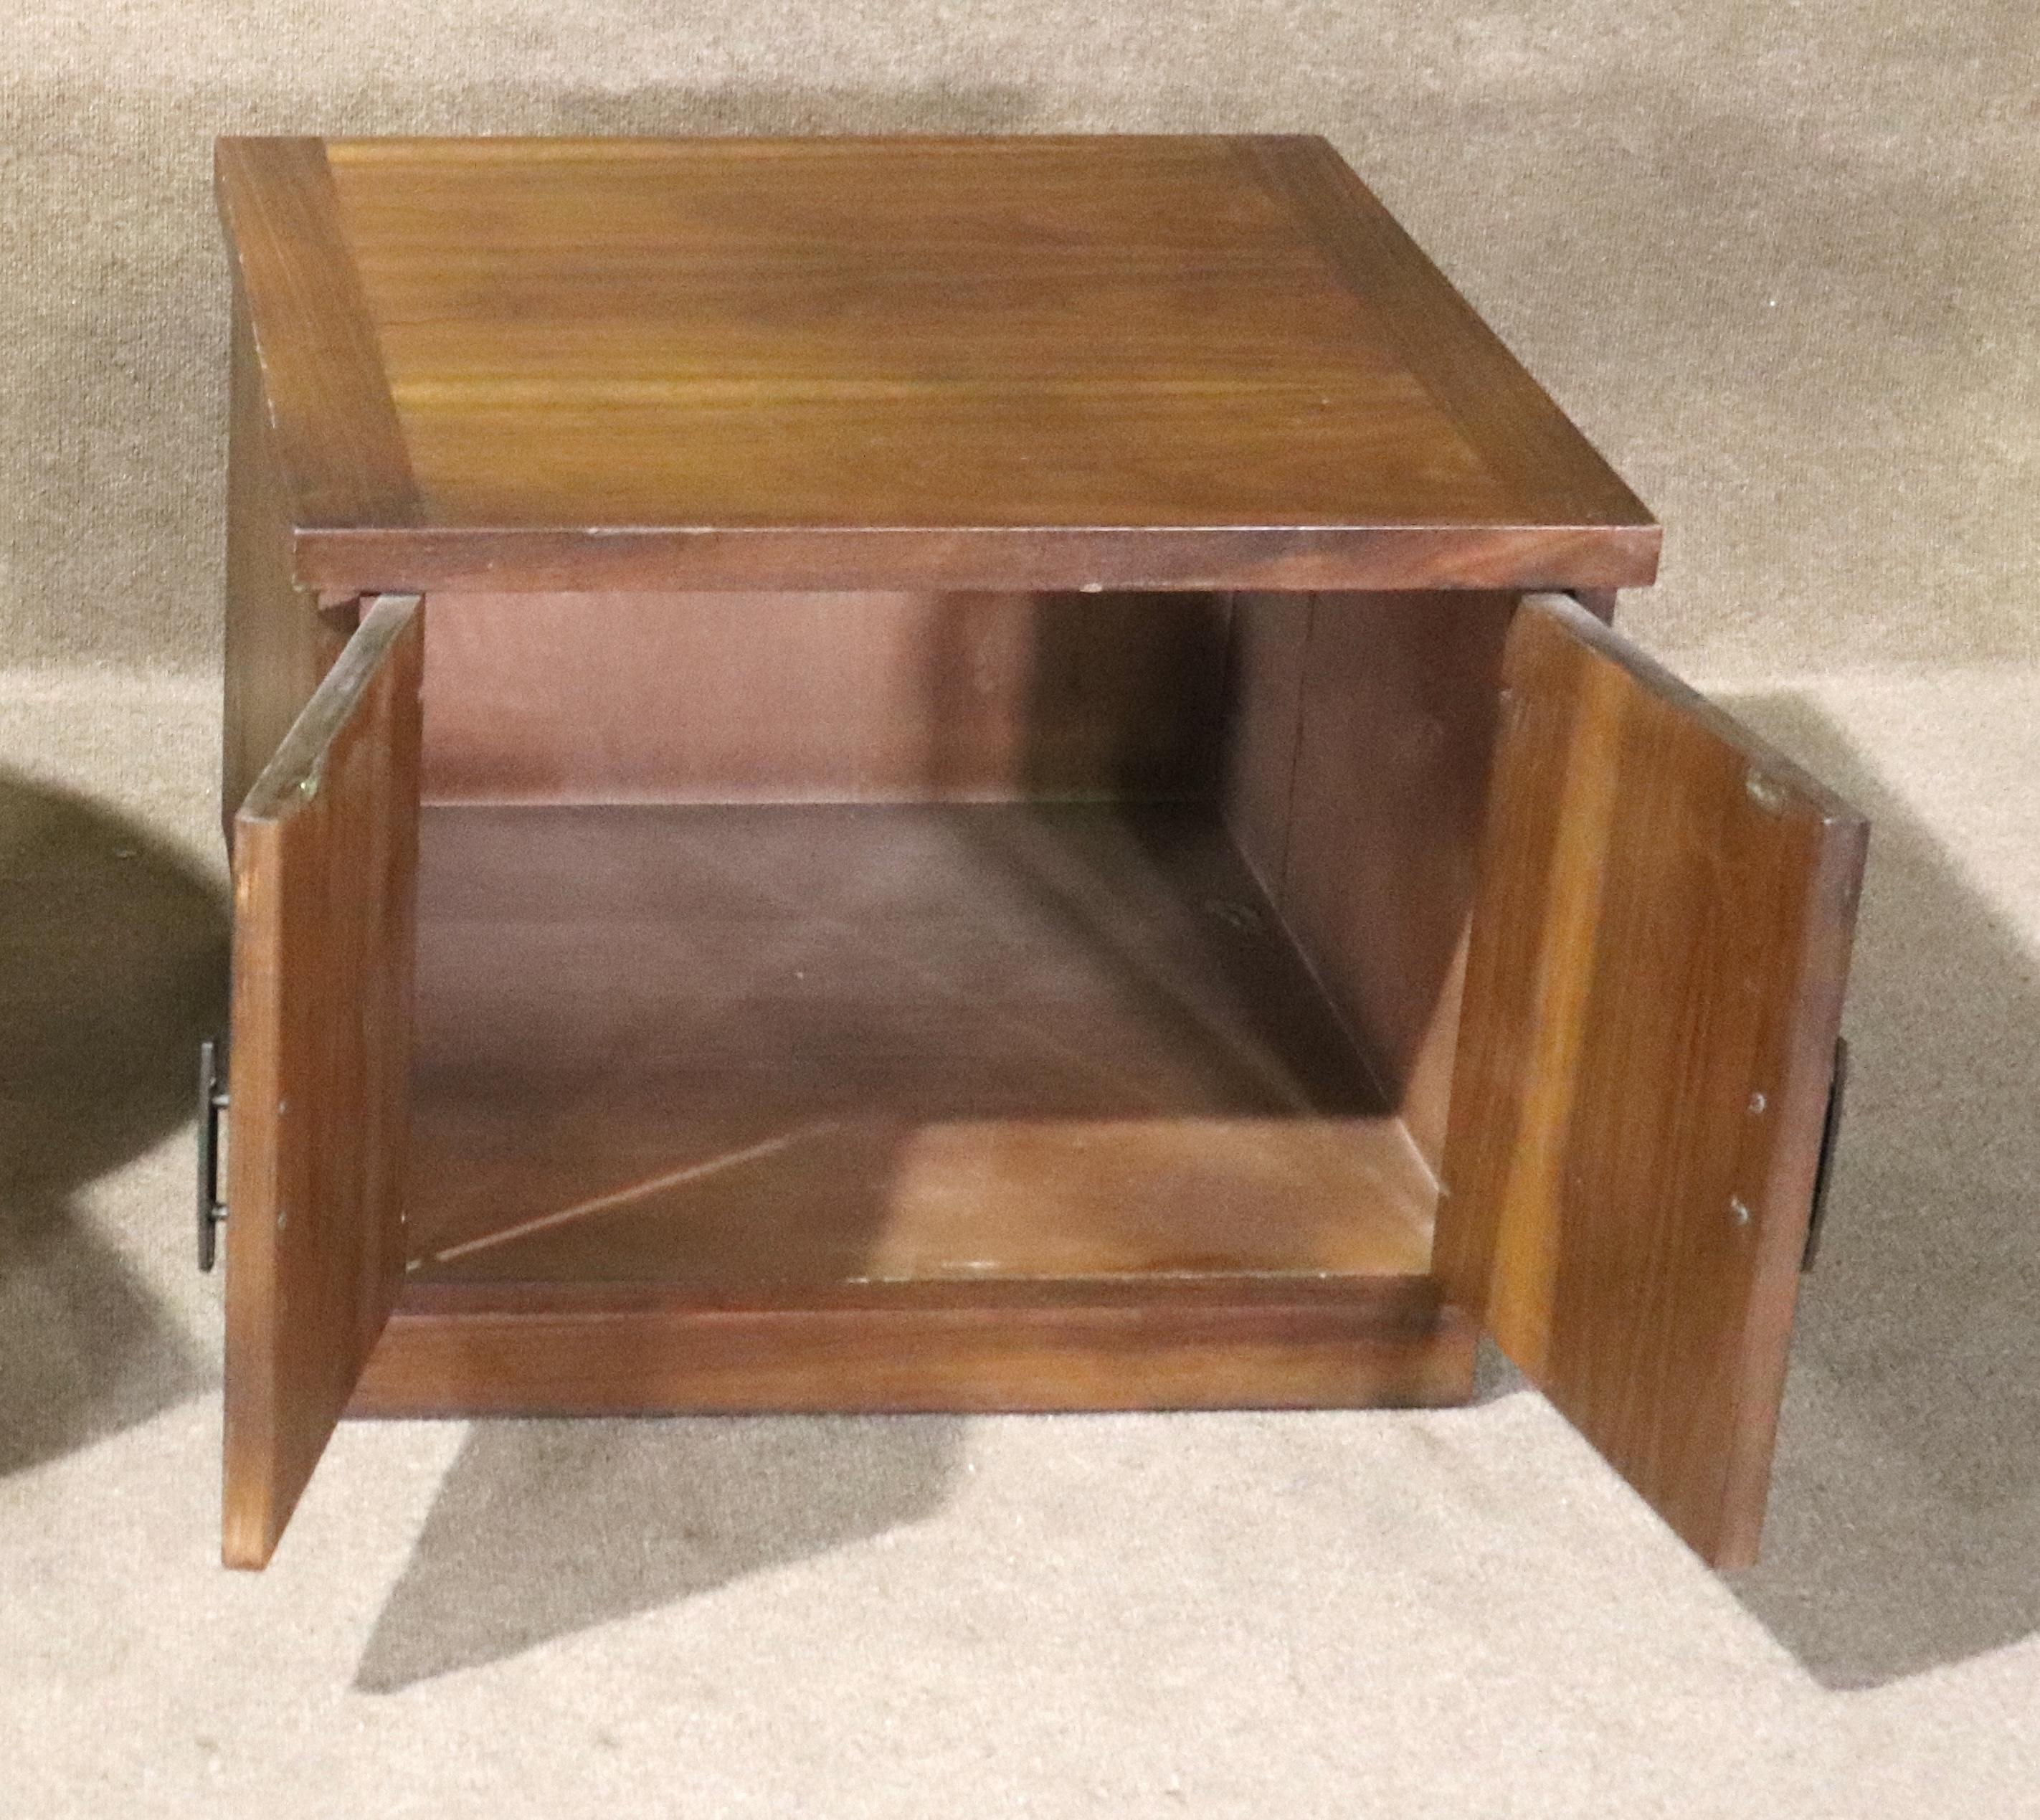 Mid-century modern side table by Lane with walnut grain and two door storage.
Please confirm location NY or NJ